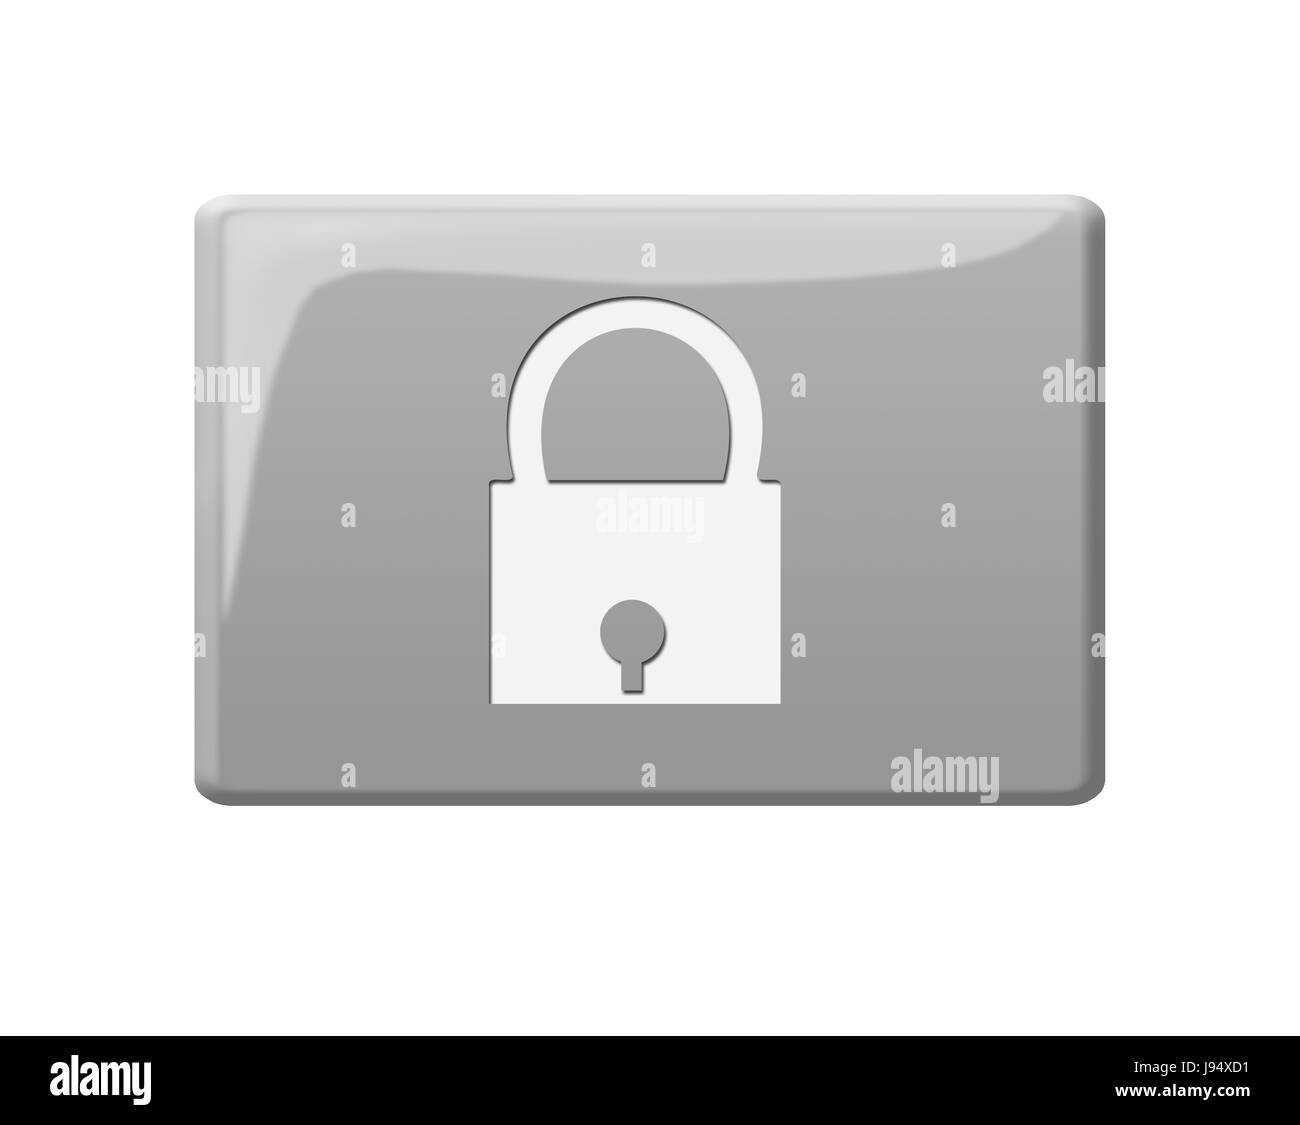 certain, button, safe, login, logout, isolated, optional, symbolic, to lock, Stock Photo